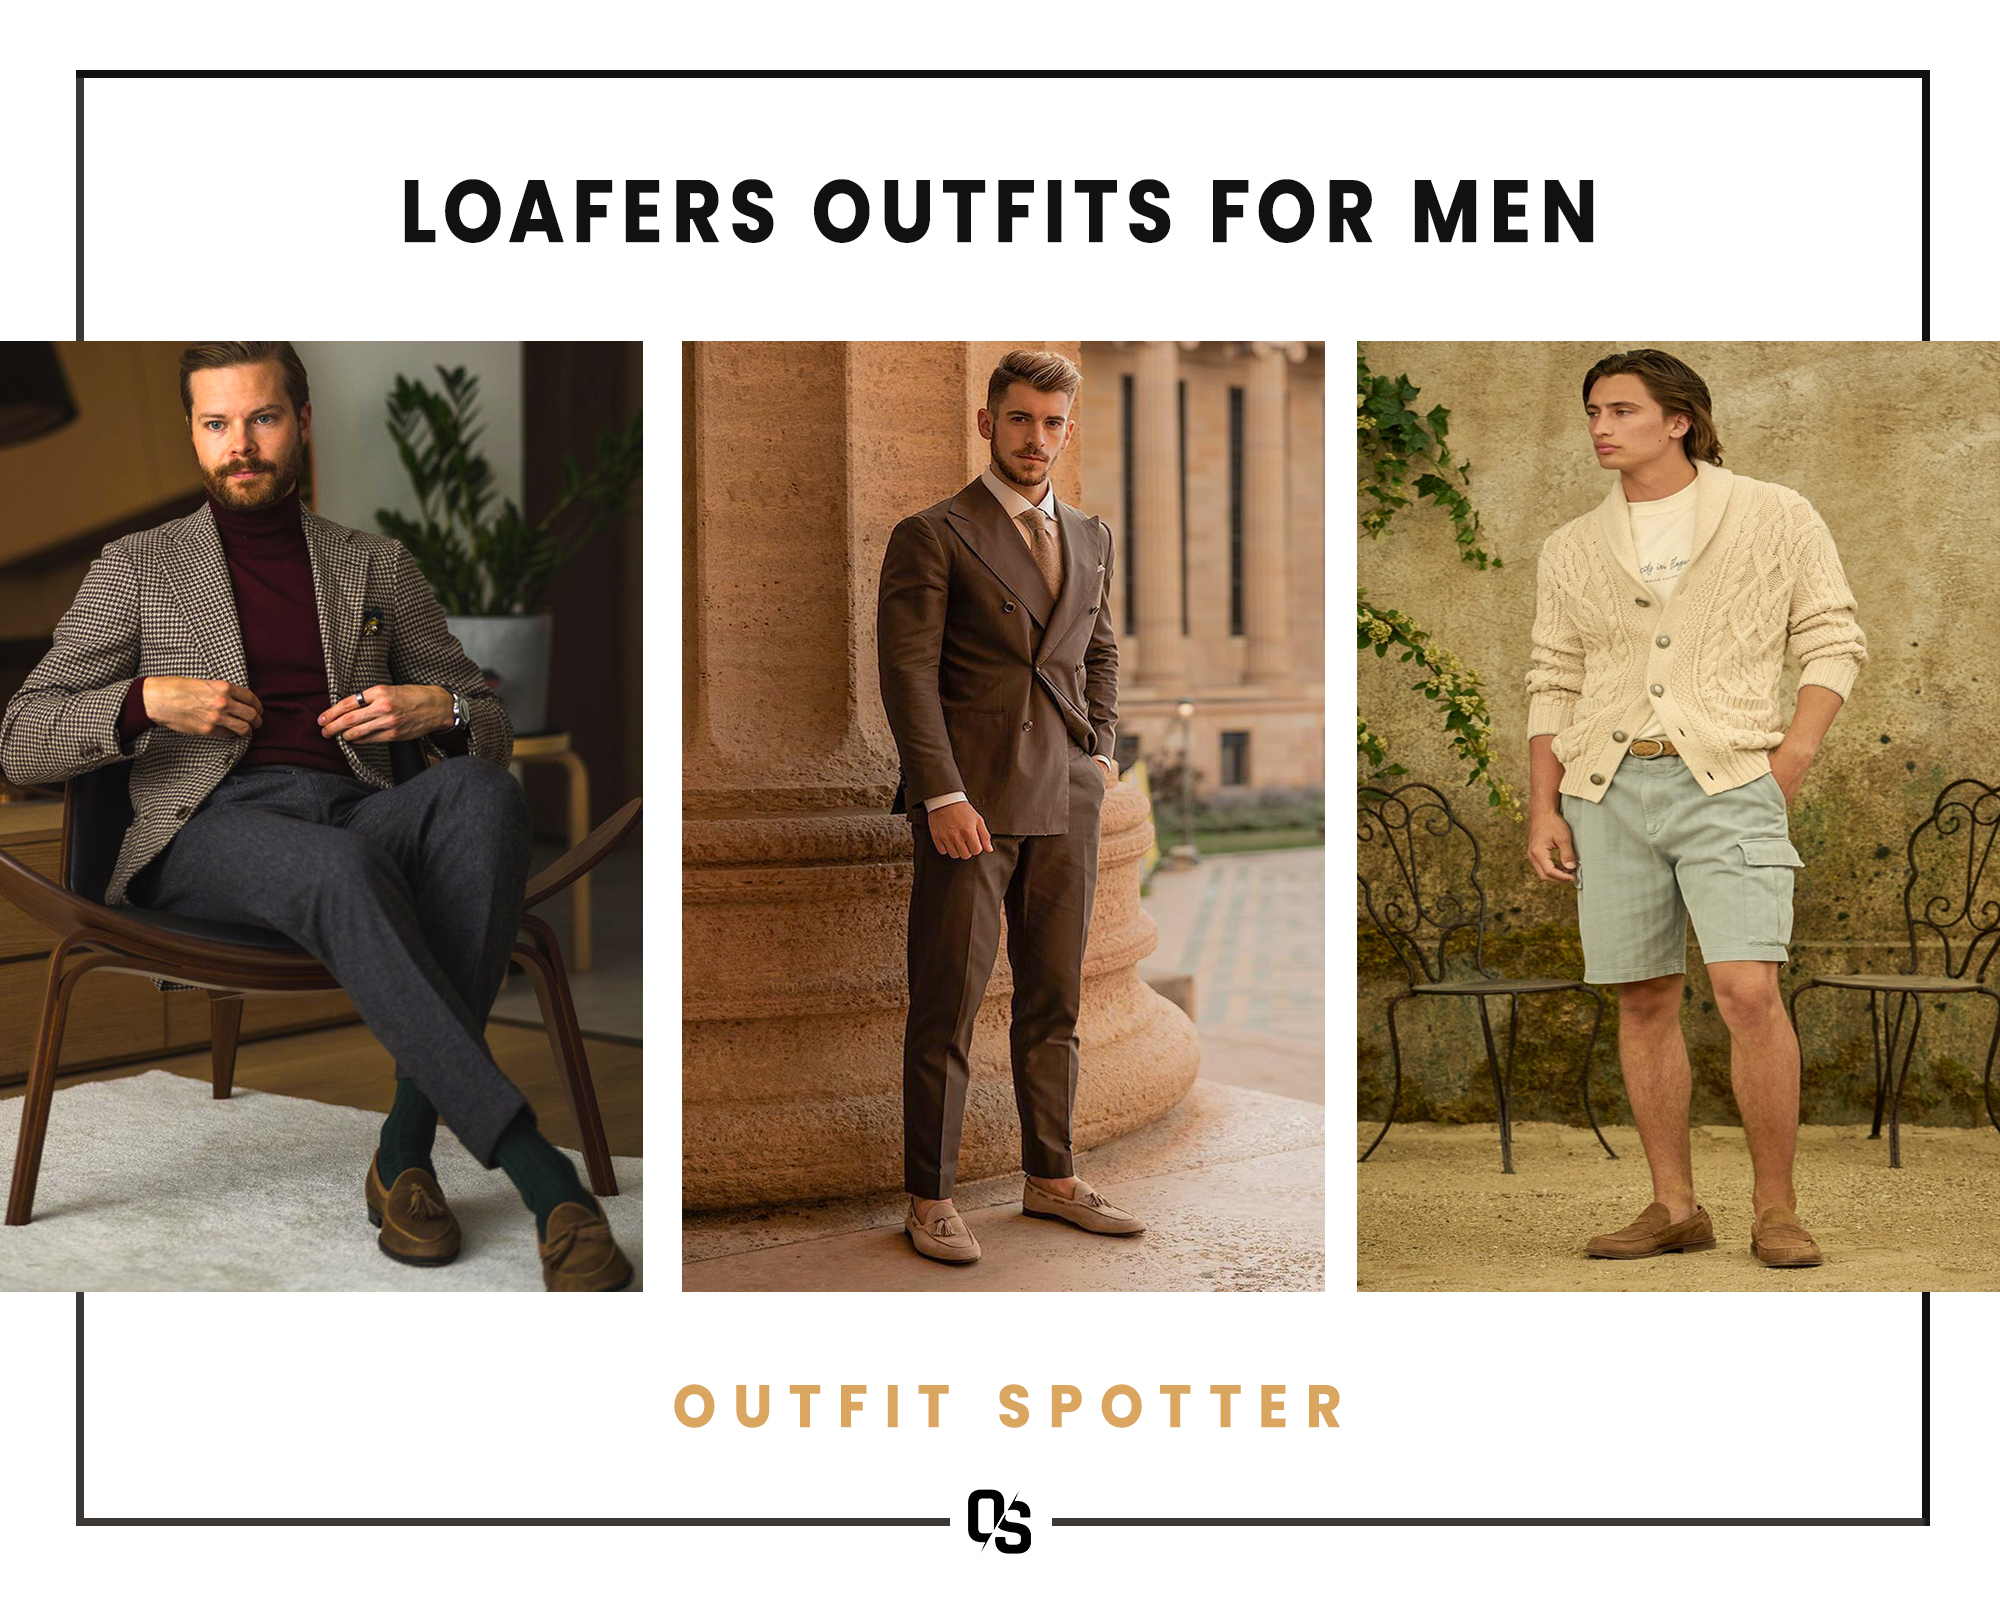 Different loafers outfits for men